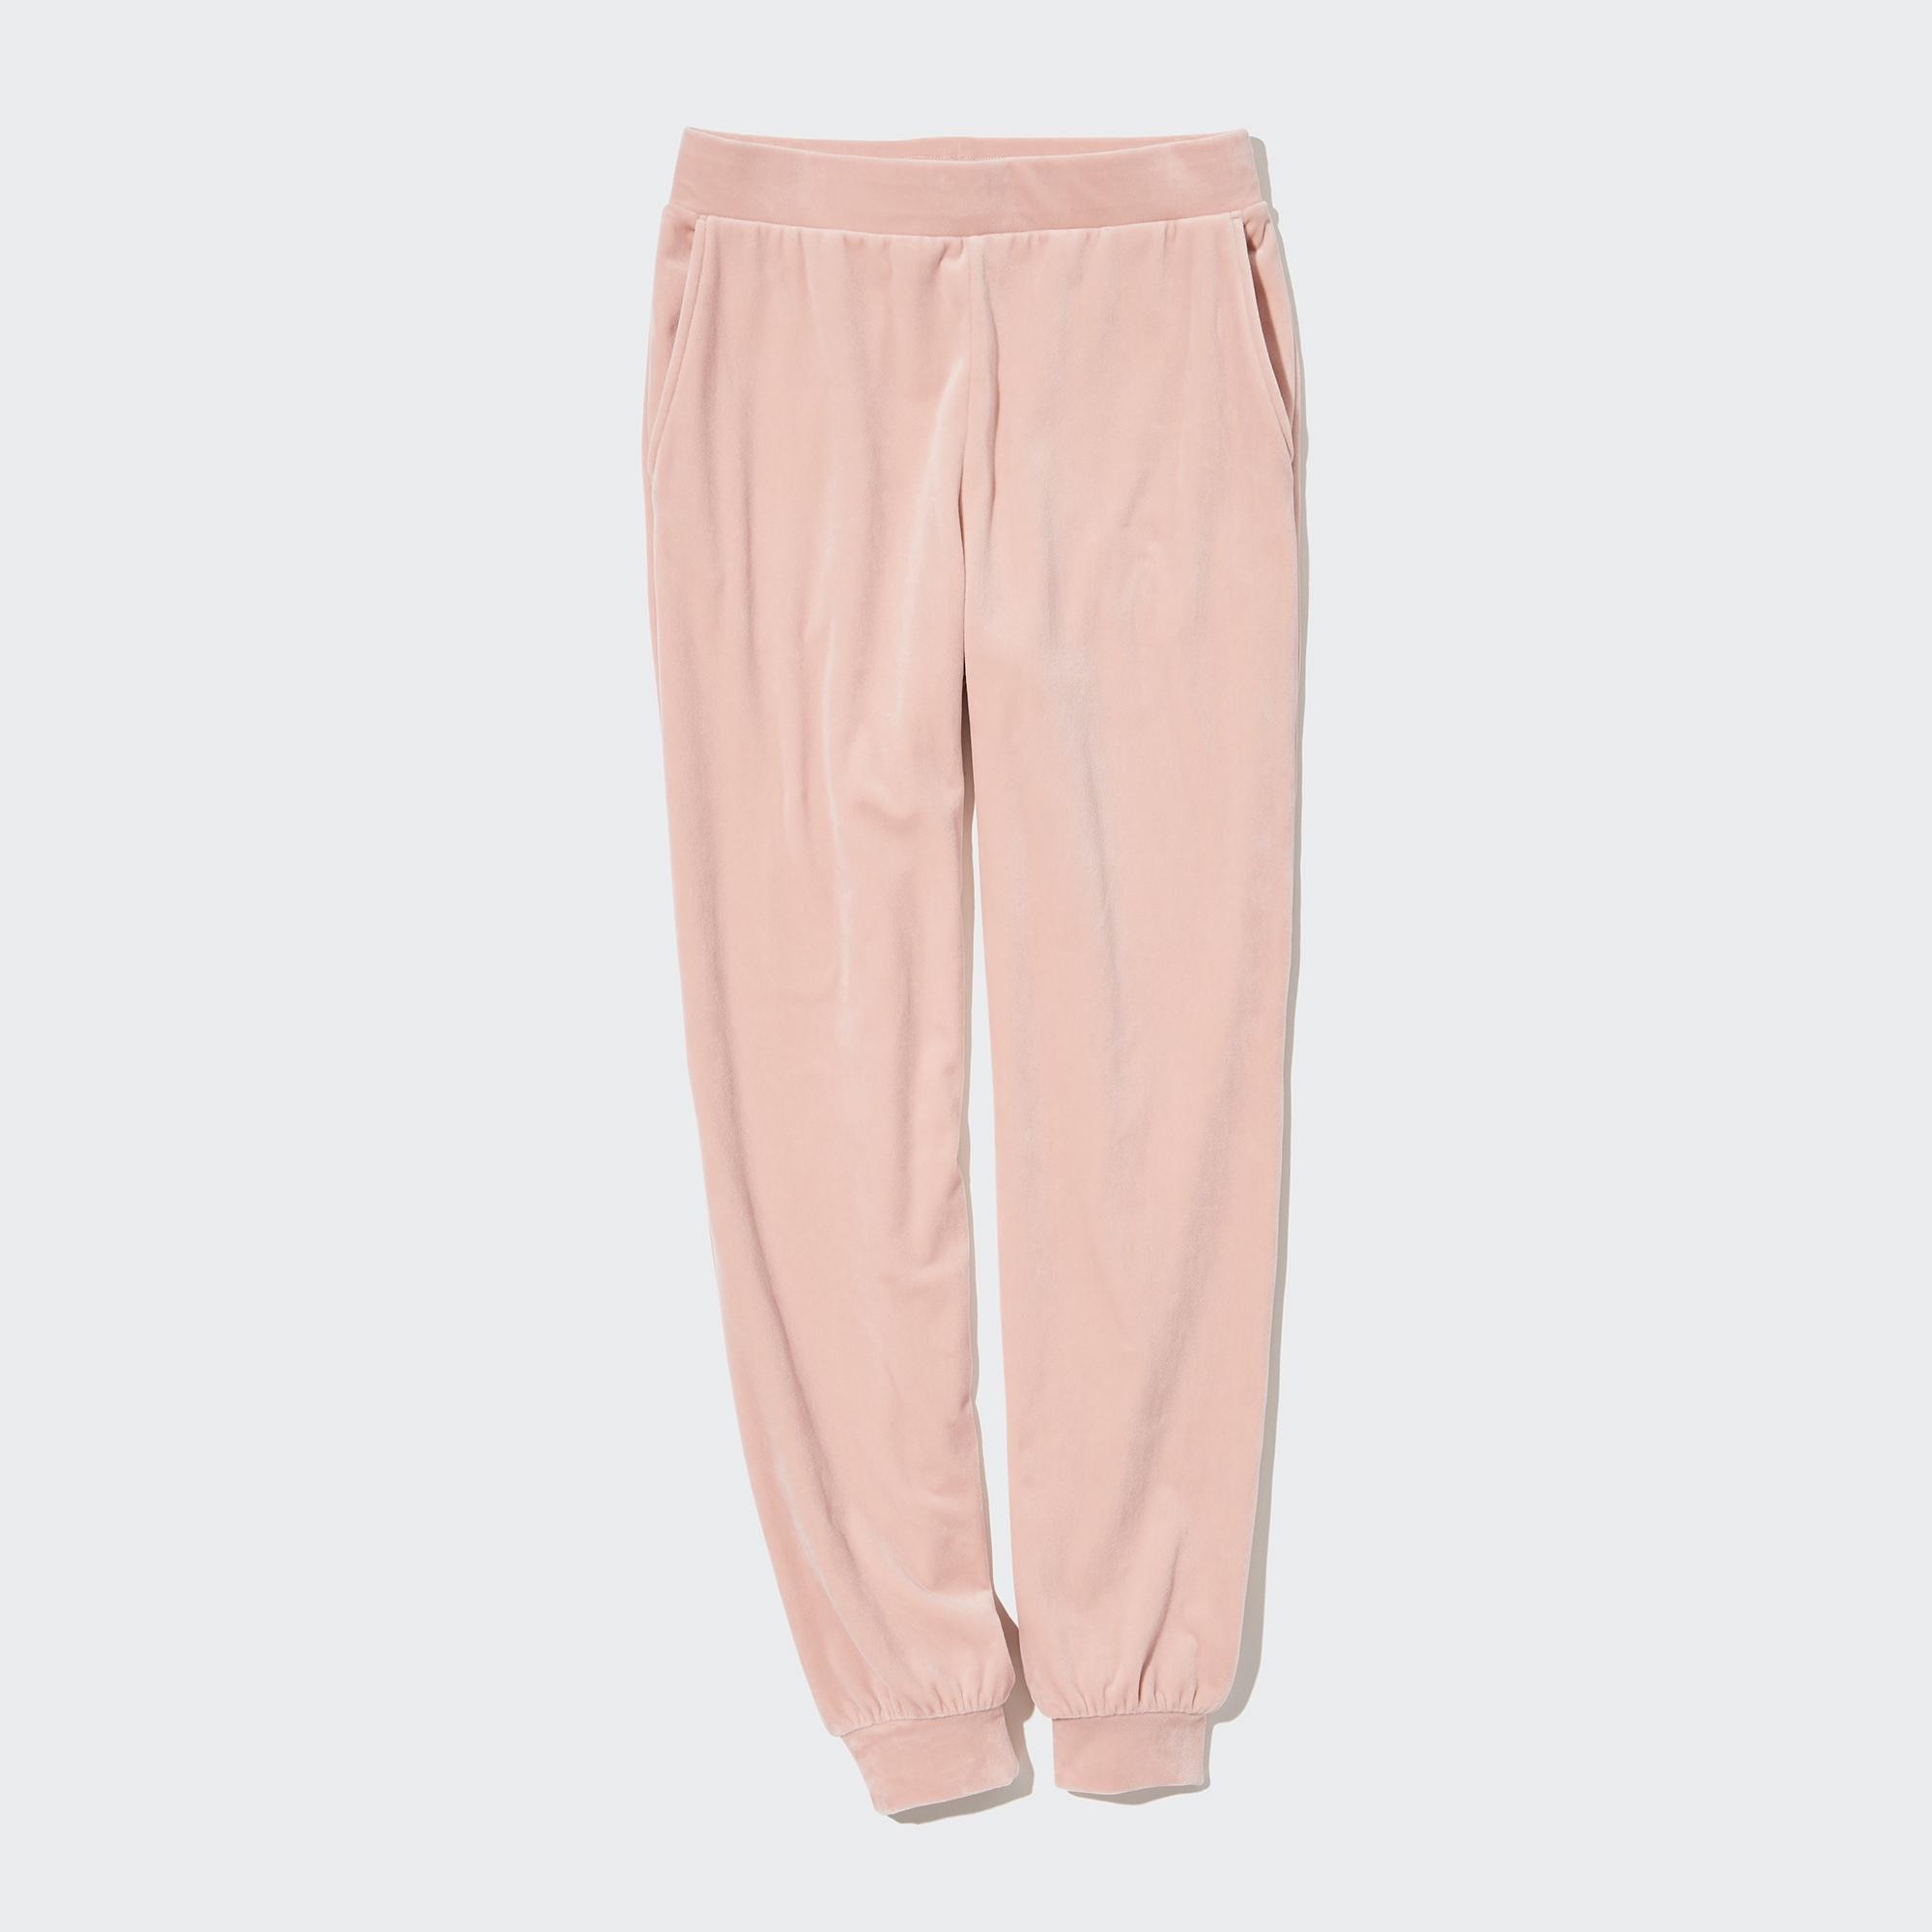 Ultra Stretch Smooth Jogger Pants Uniqlo Women Clothing Pants Stretch Pants 